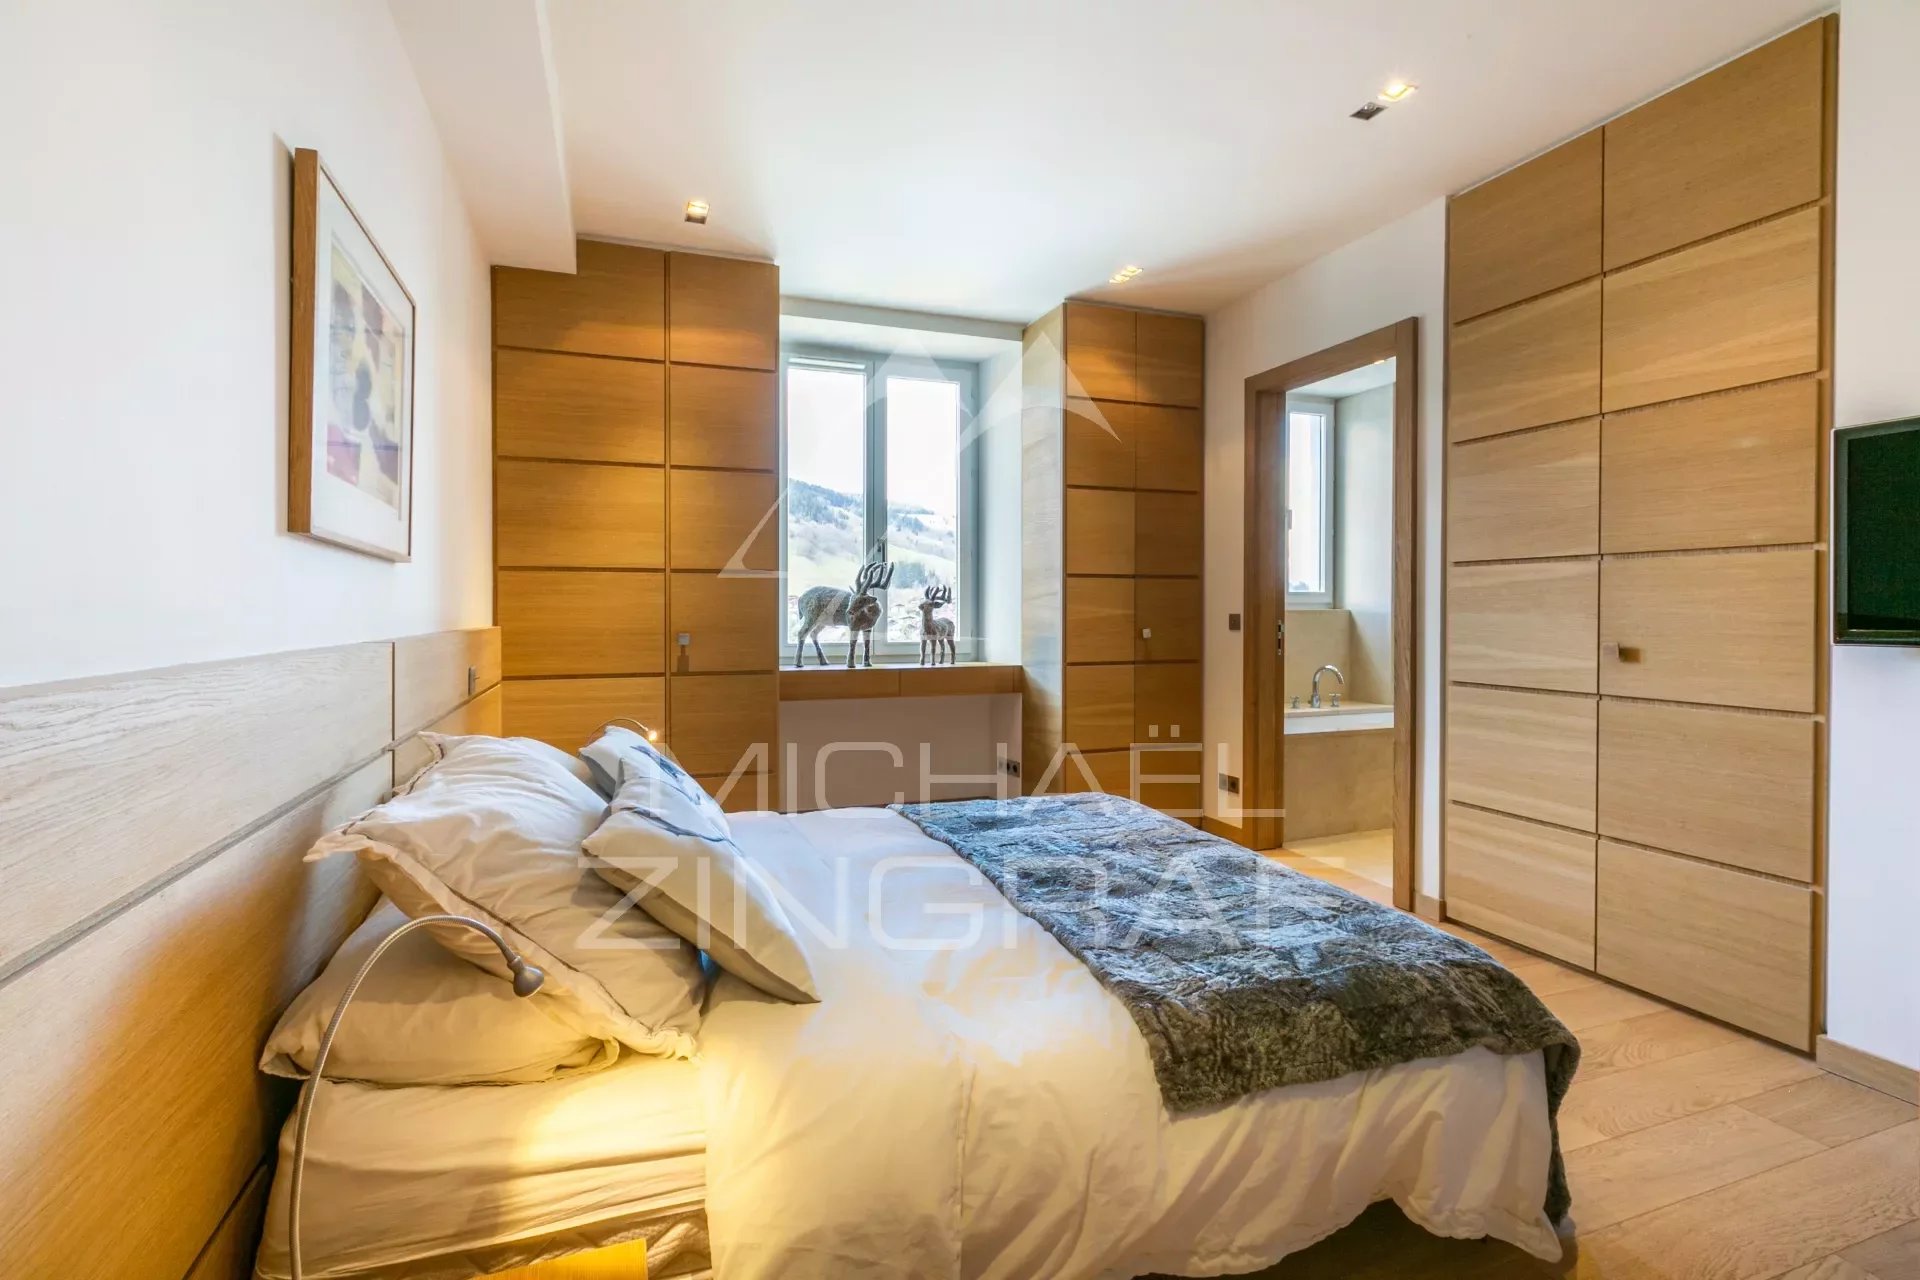 Exceptional three-bedroom apartment - Center of Megève - View and quiet